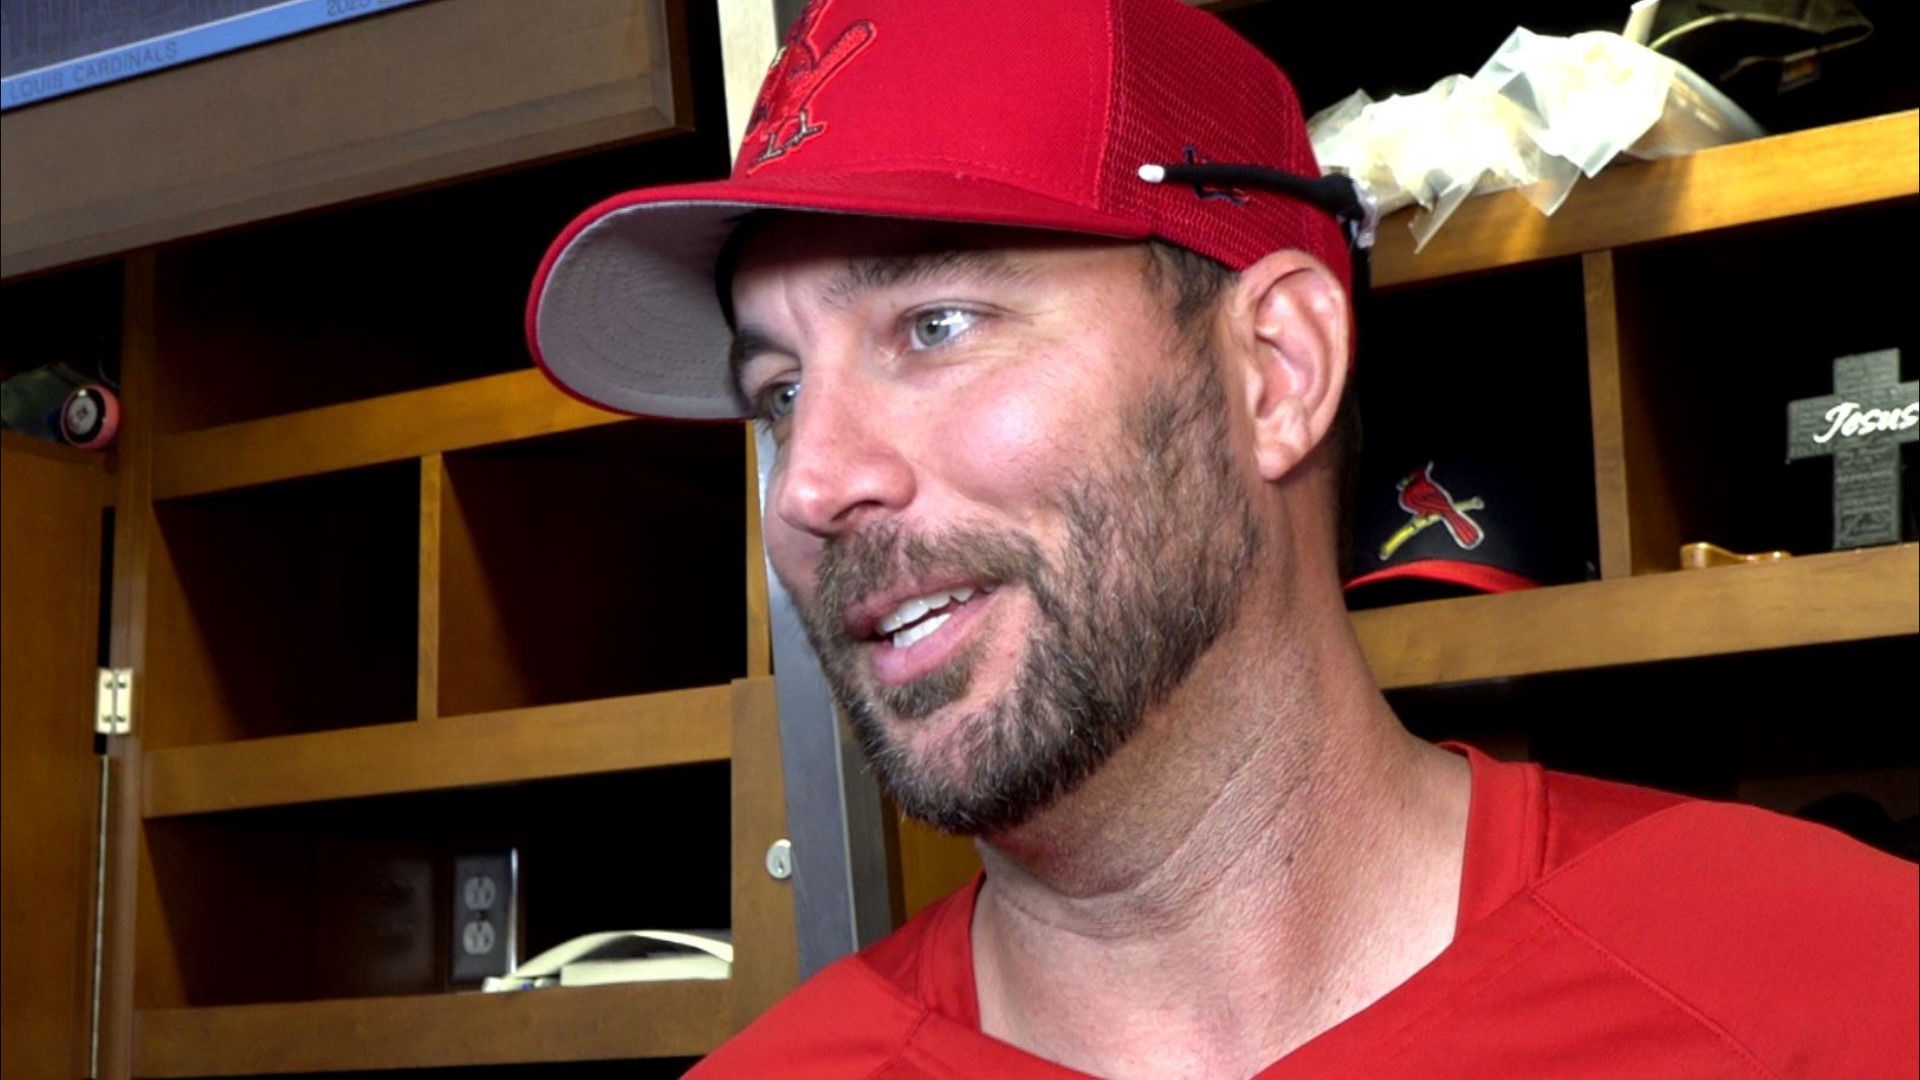 Adam Wainwright discusses his final weekend with the St. Louis Cardinals. The team will honor him throughout the weekend.